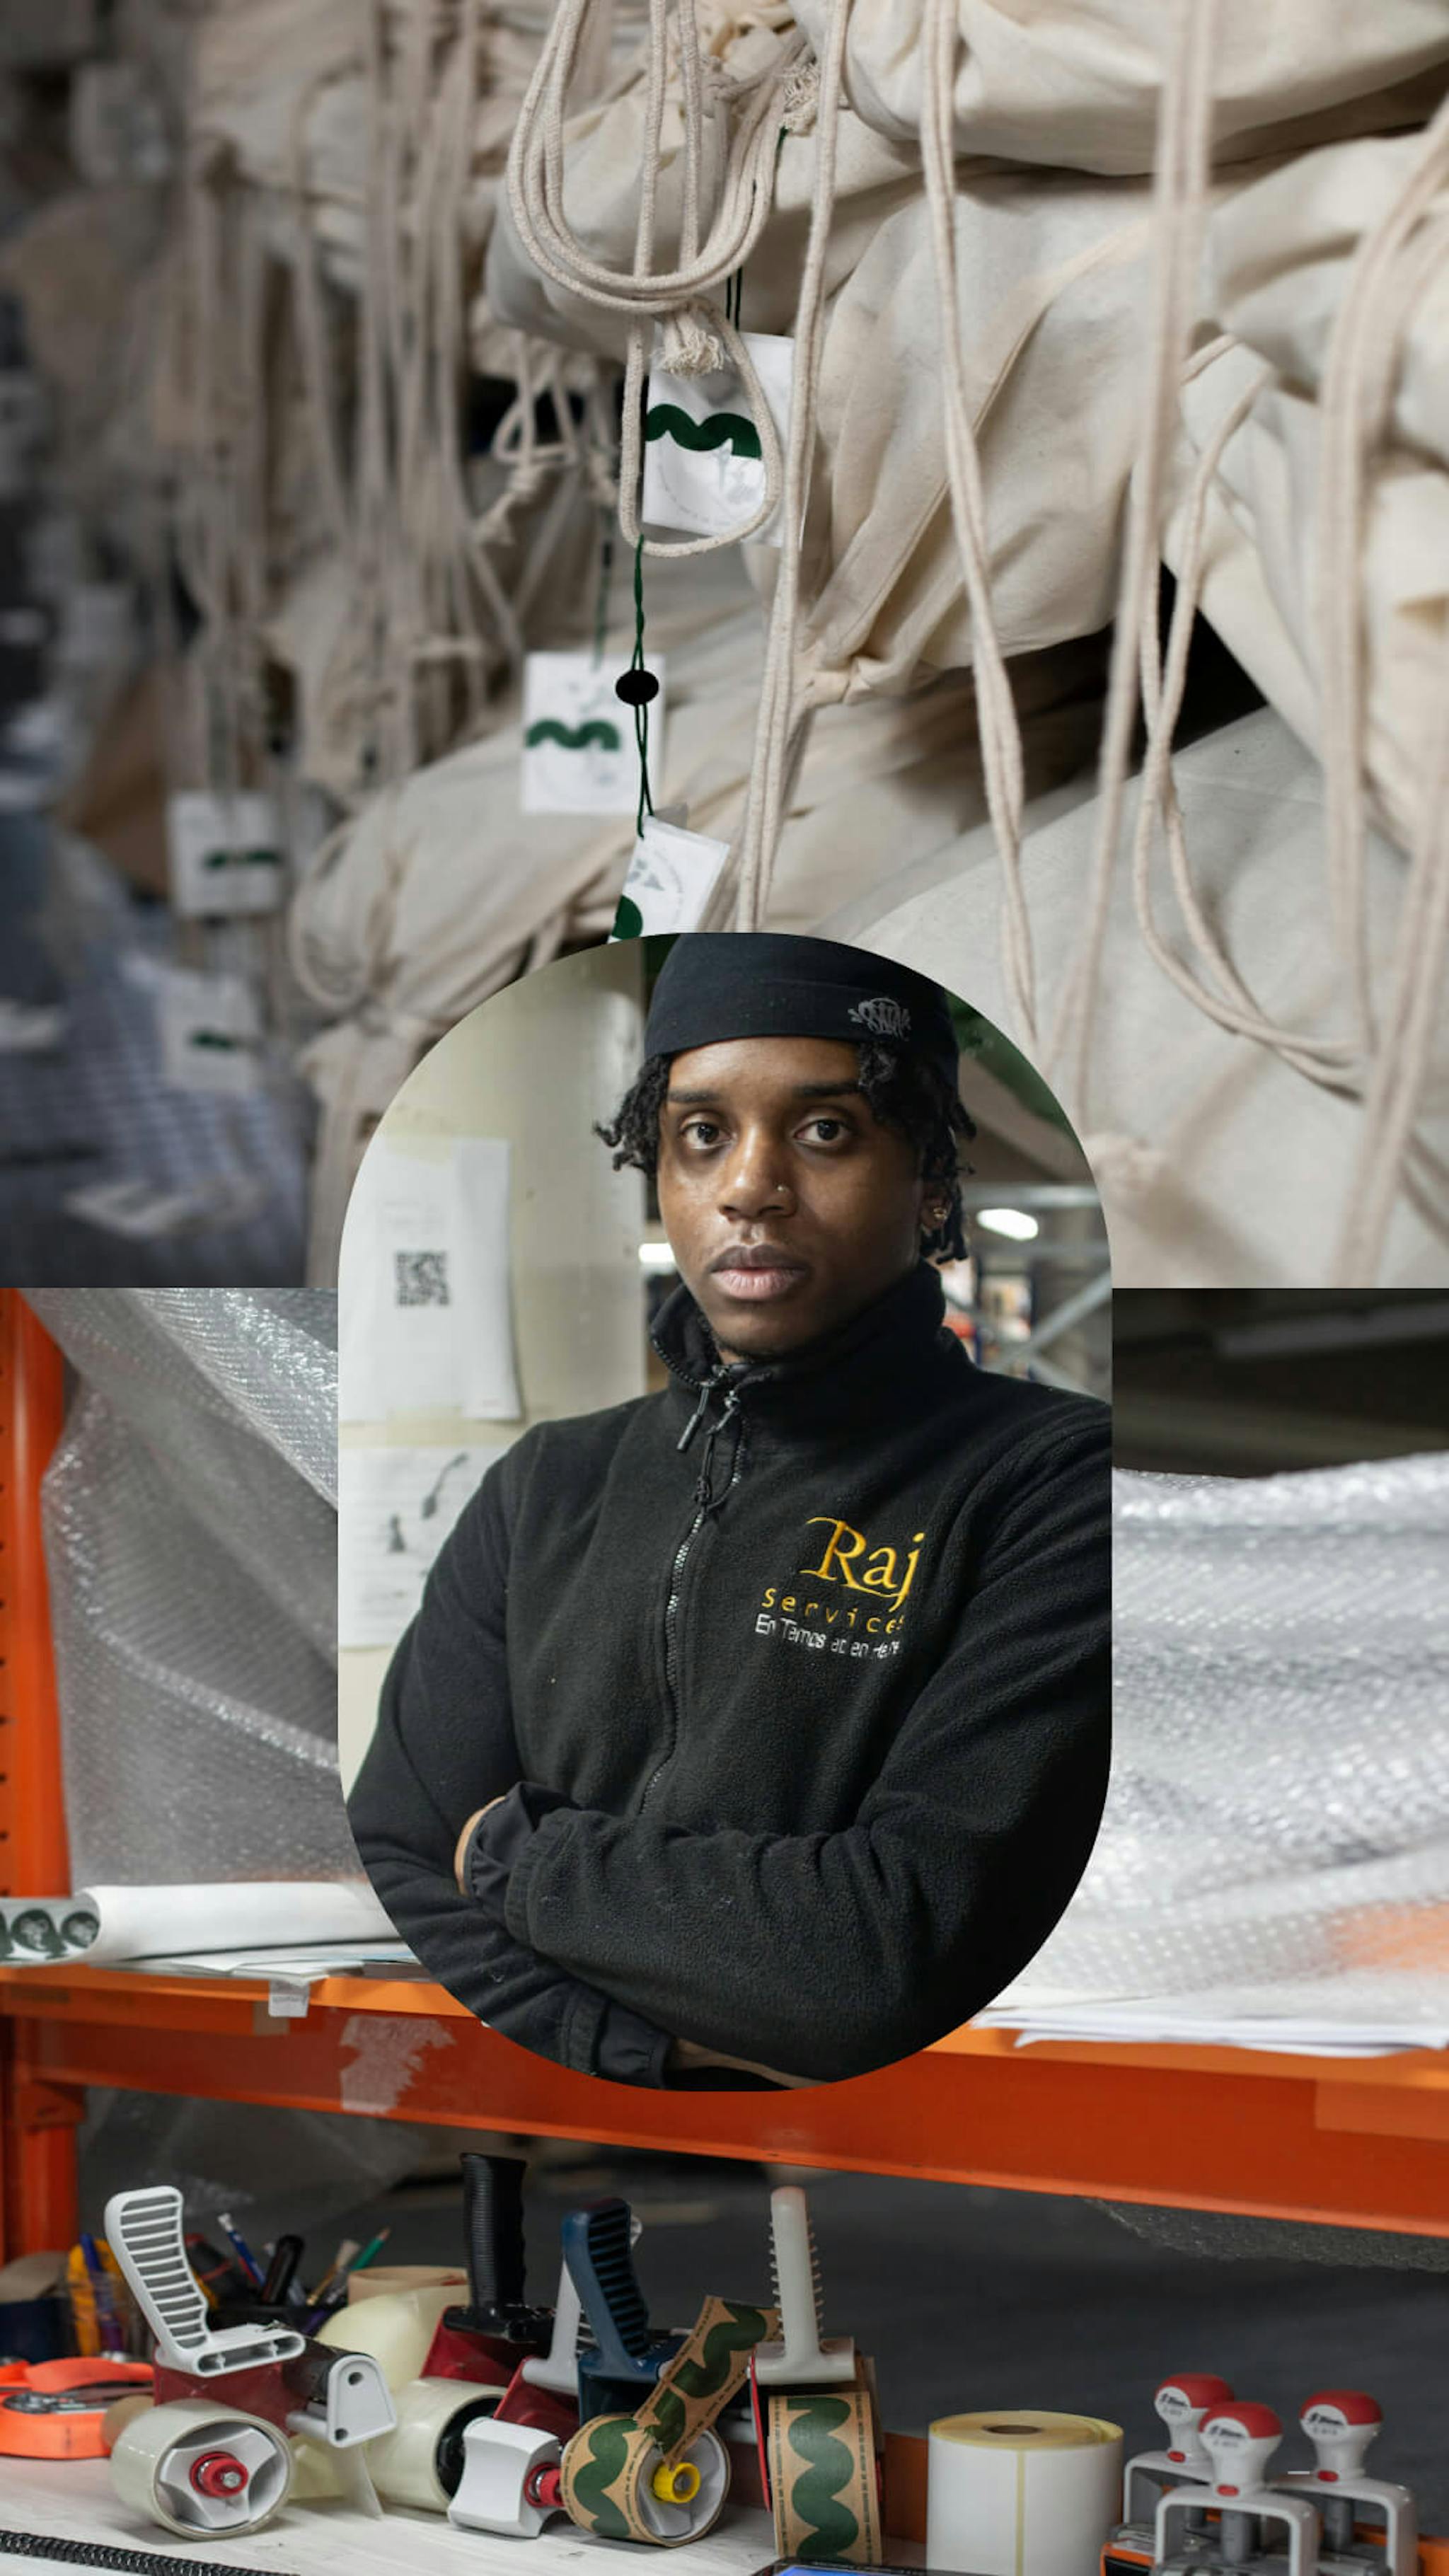 A split image depicting a warehouse scene. On the top, packed canvas bags hang in rows with identification tags. The bottom shows a close-up of a worker wearing a 'Raj Service' fleece, arms crossed, with rolls of packing tape and bubble wrap in the background, indicating a packaging station.